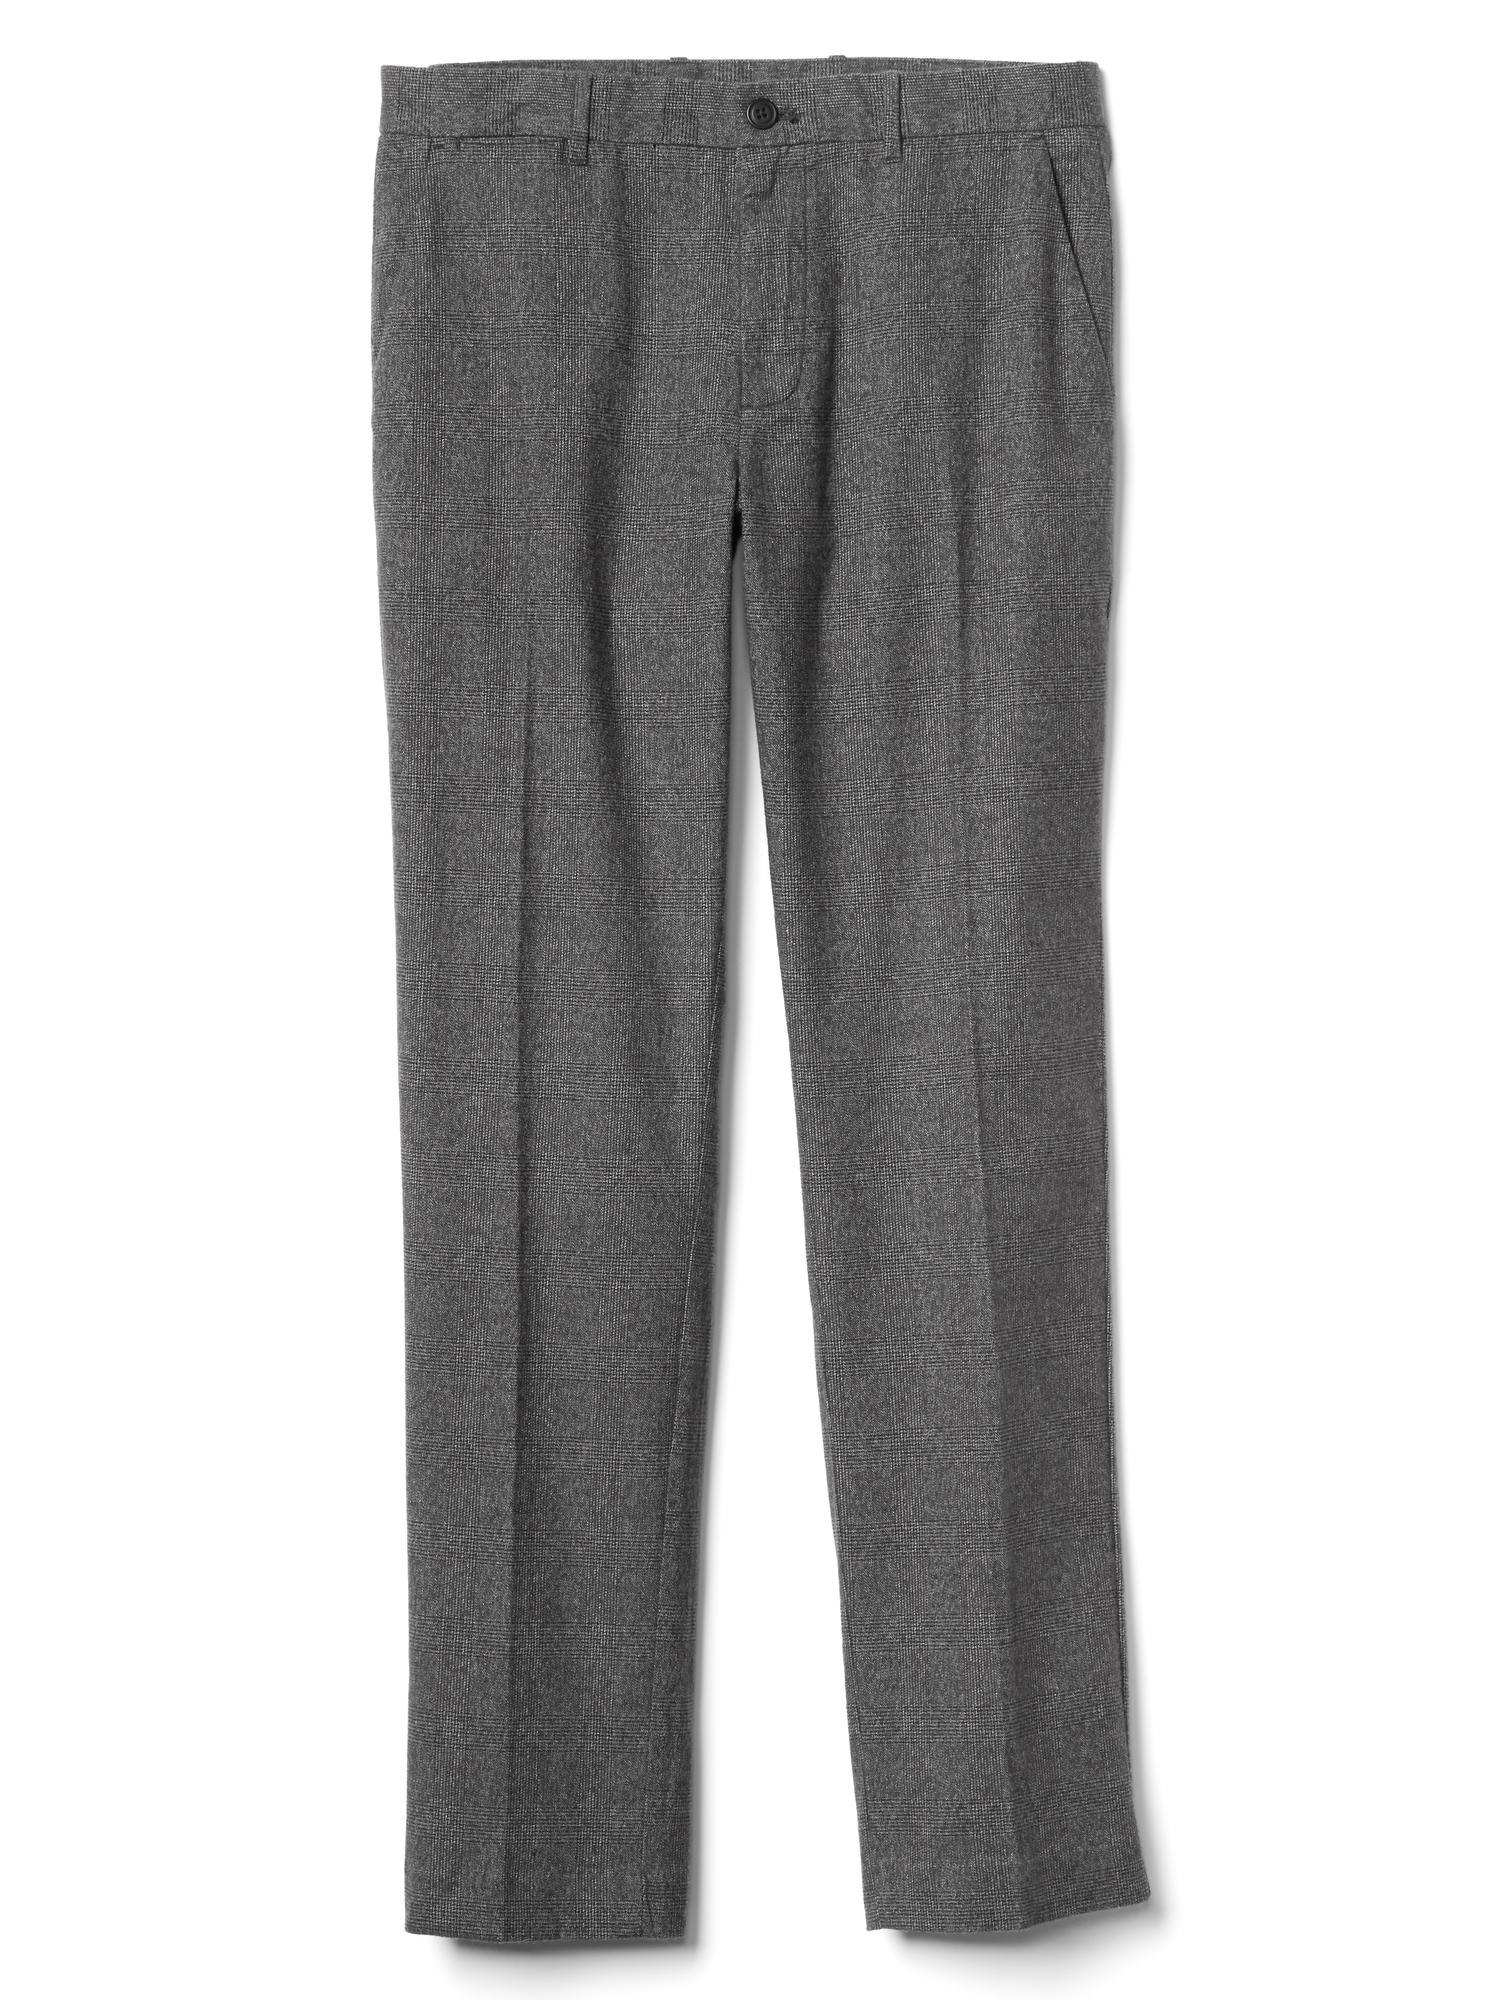 Brushed Cotton Pattern Pants in Slim Fit with GapFlex | Gap